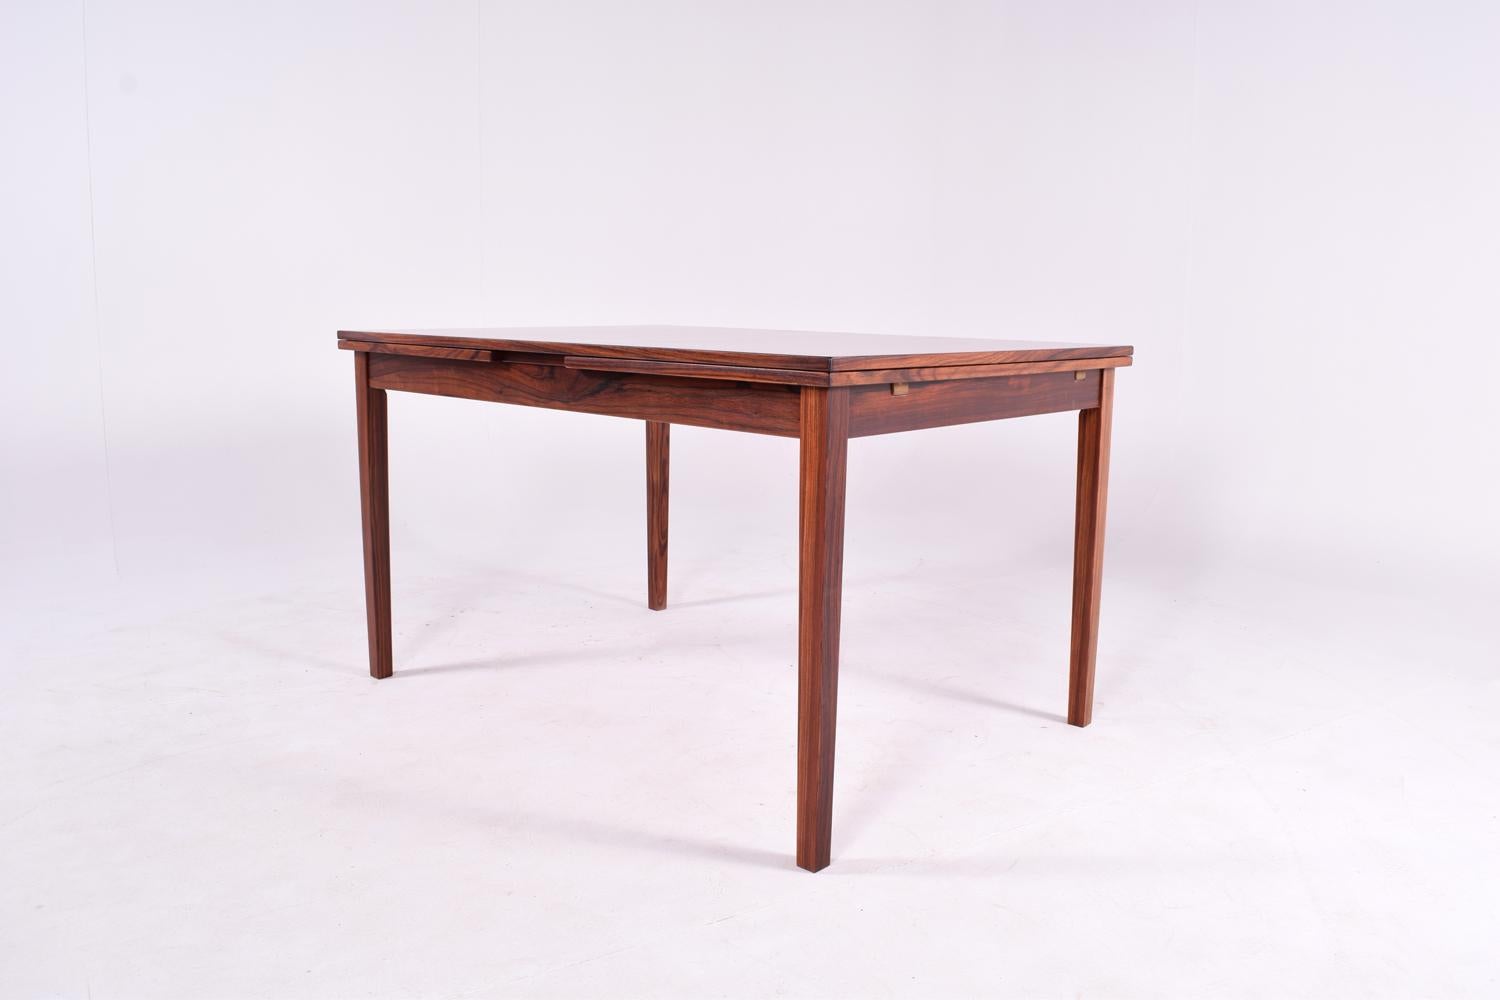 Midcentury Danish dining table designed by Kaj Winding, an amazing table with beautiful rosewood veneer, elegant geometric design and great craftsmanship.
A rosewood frame circles the top of the table and of the two leaves, creating a pattern when